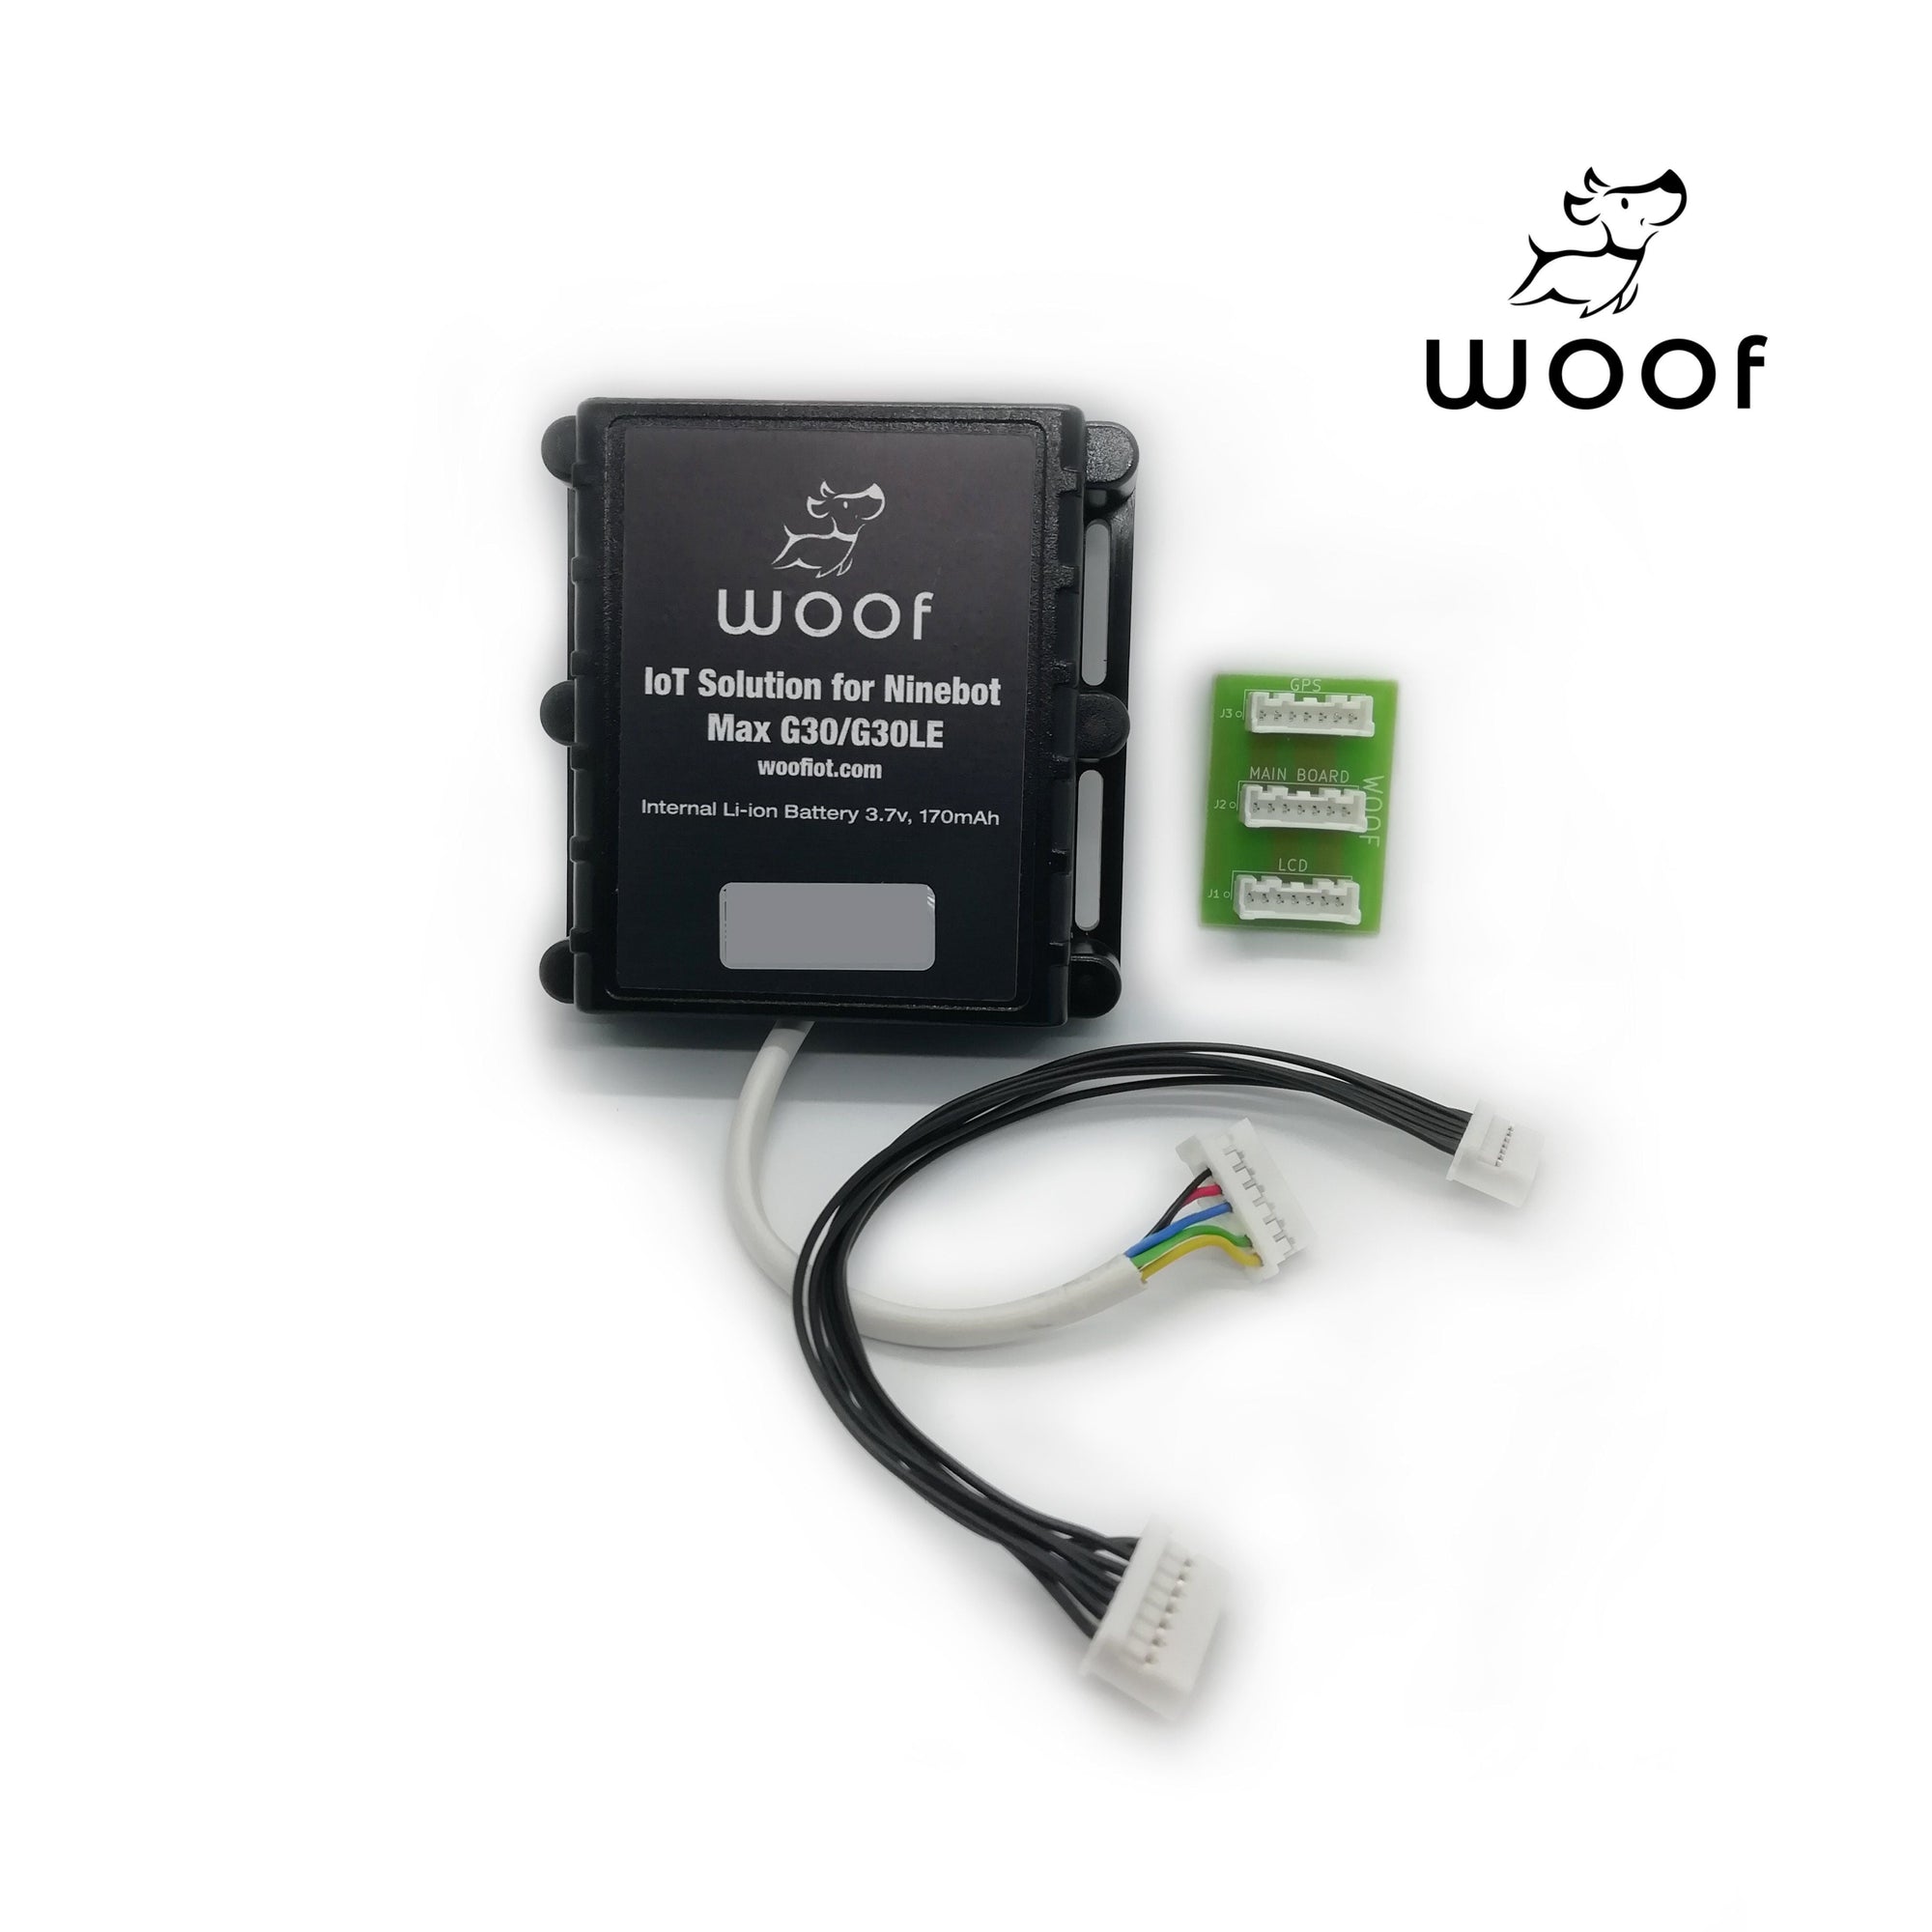 Woof IoT - Woof IoT Upgrade Kit For Ninebot Scooter Max G30, G30LE